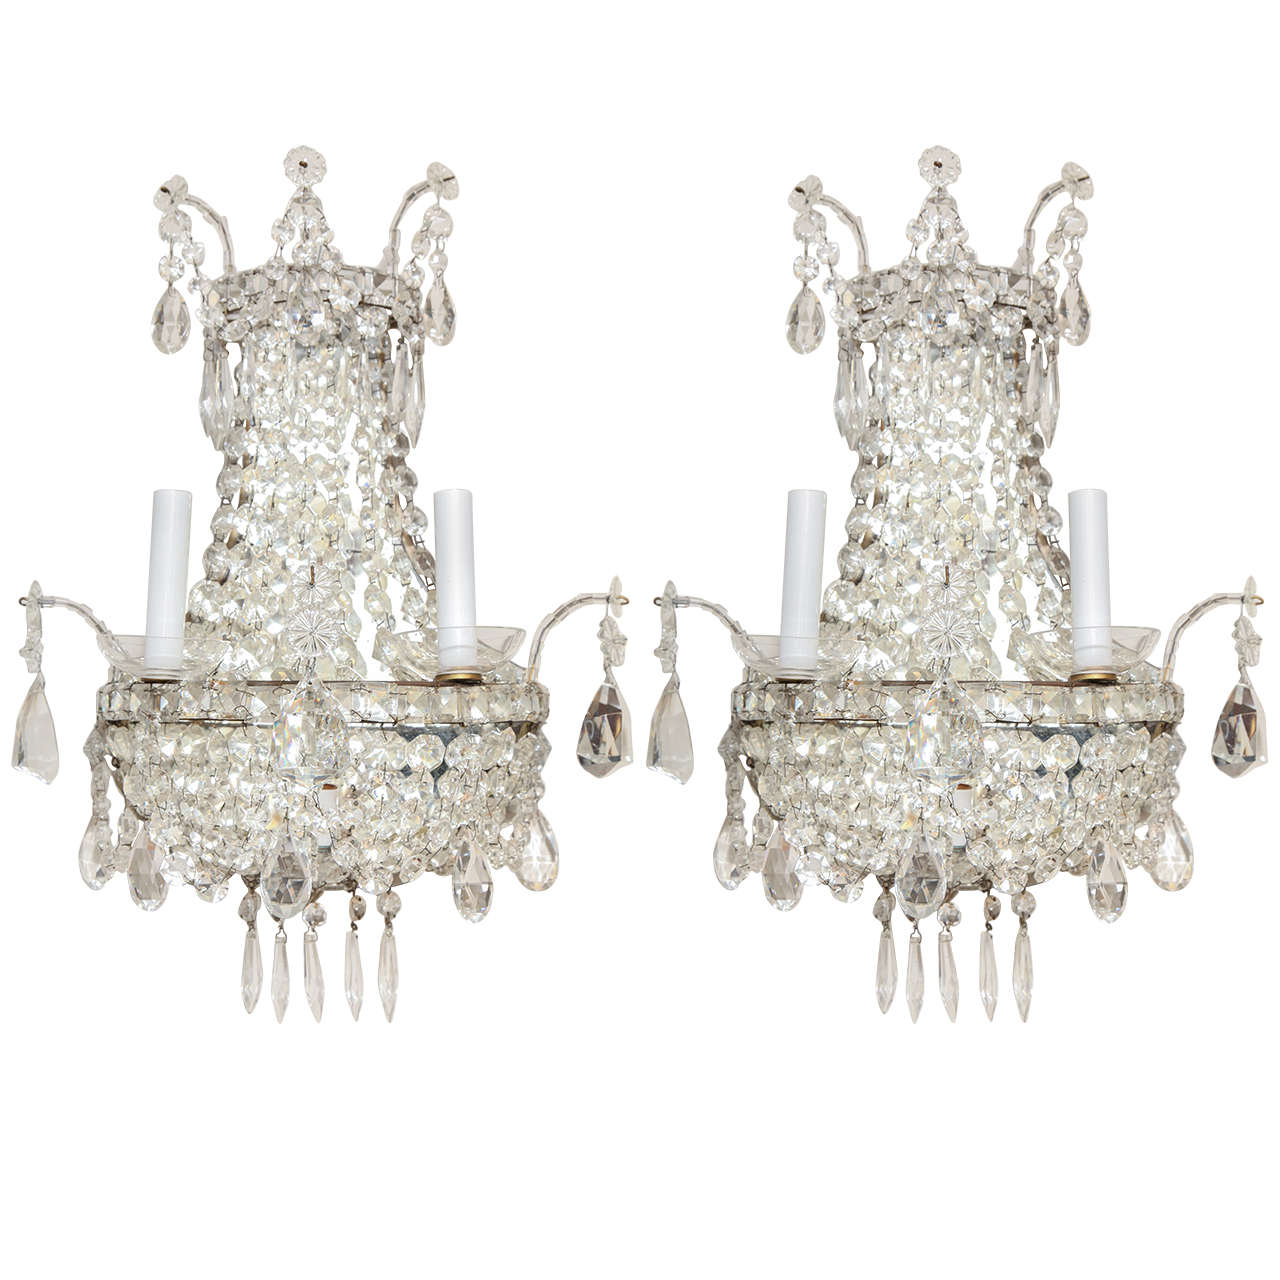 Pair of English Regency Style Crystal Sconces